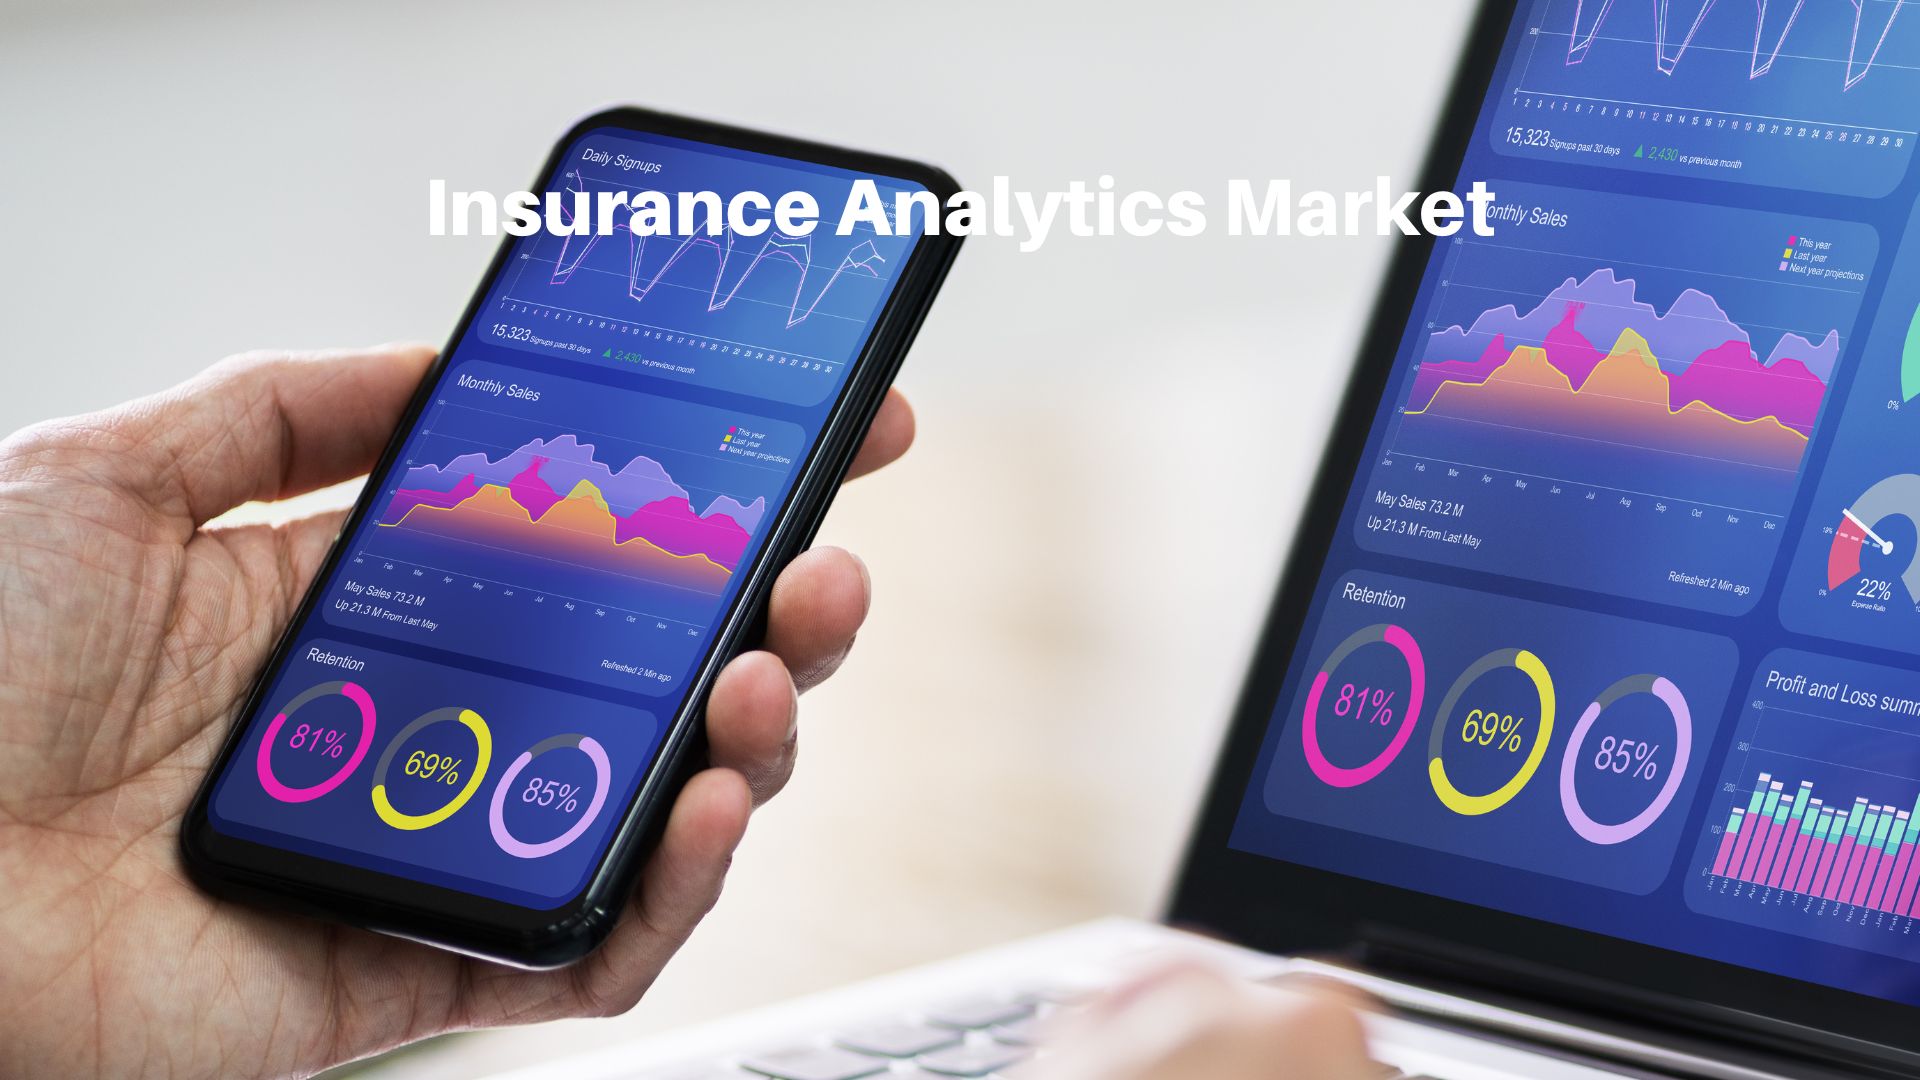 Insurance Analytics Market is forecasted to reach USD 35.83 billion by 2032